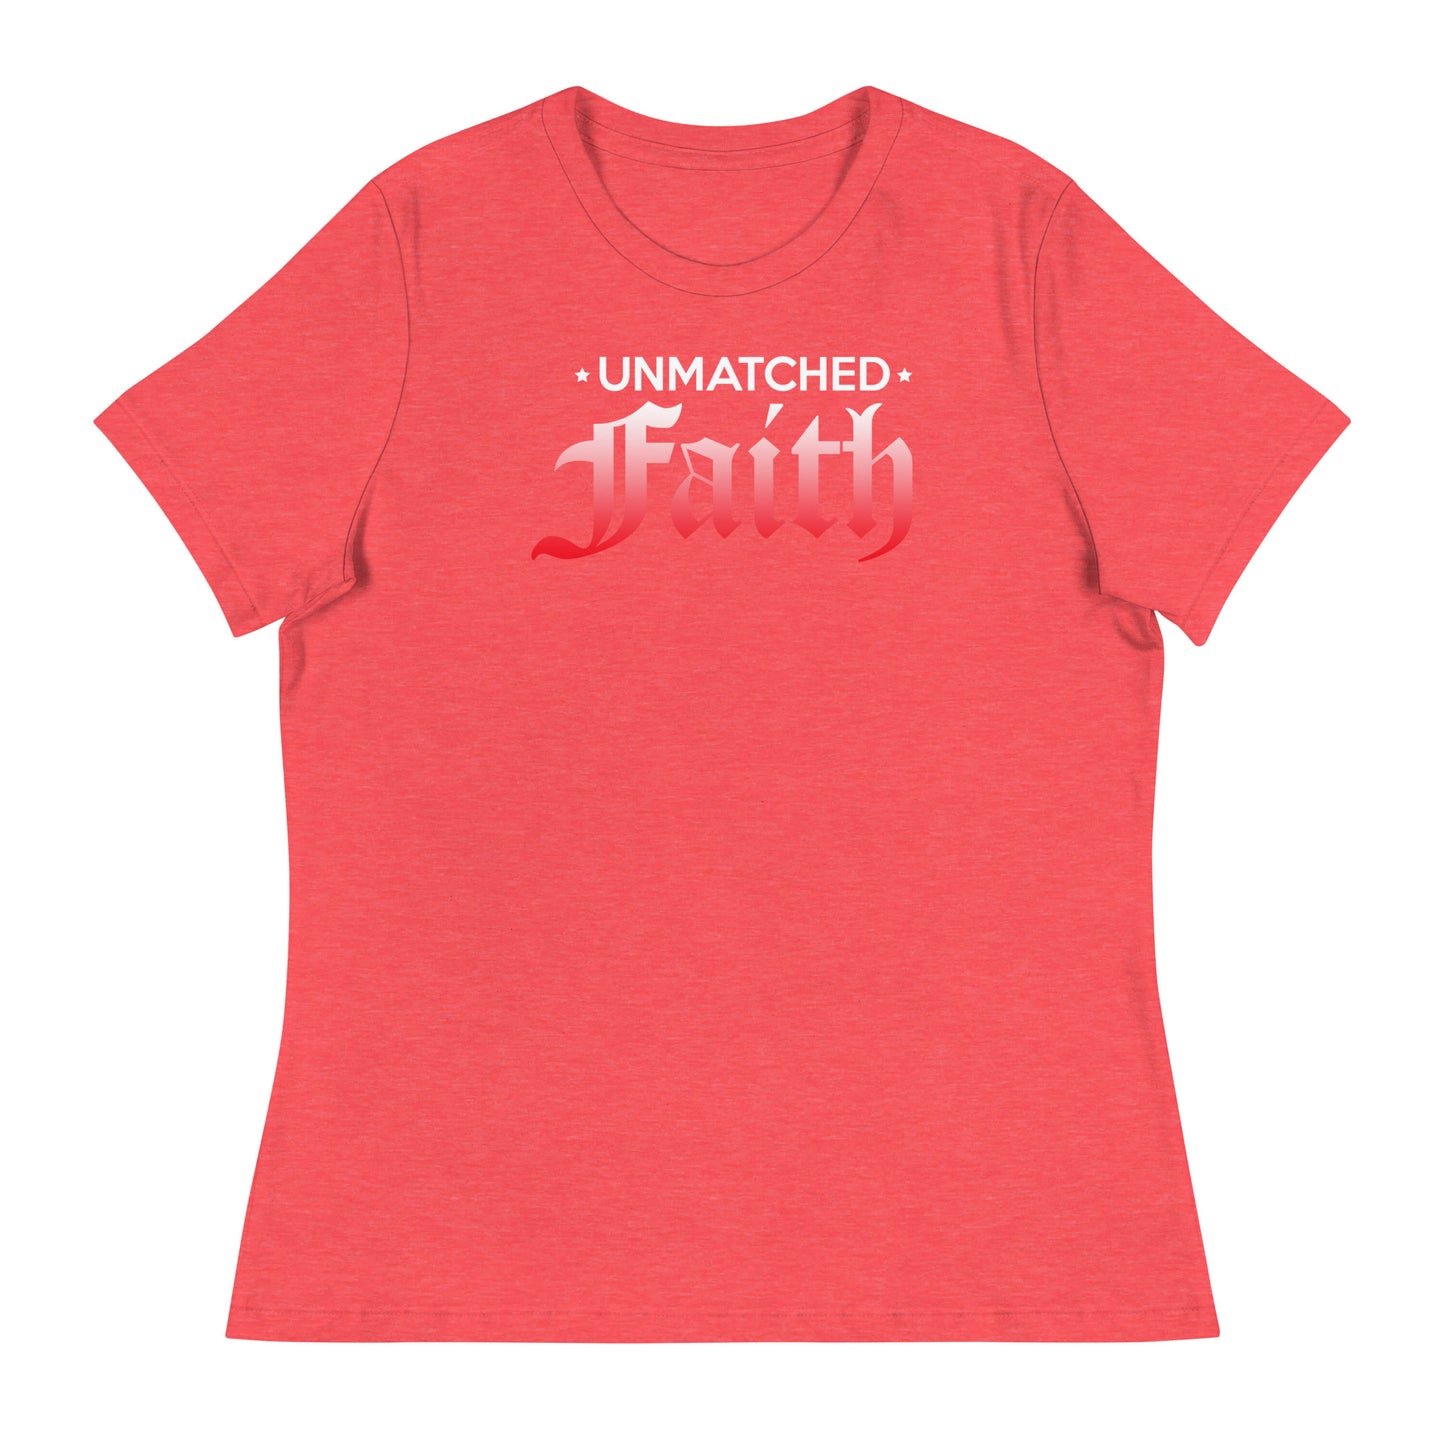 Unmatched Faith - Women's Relaxed T-Shirt